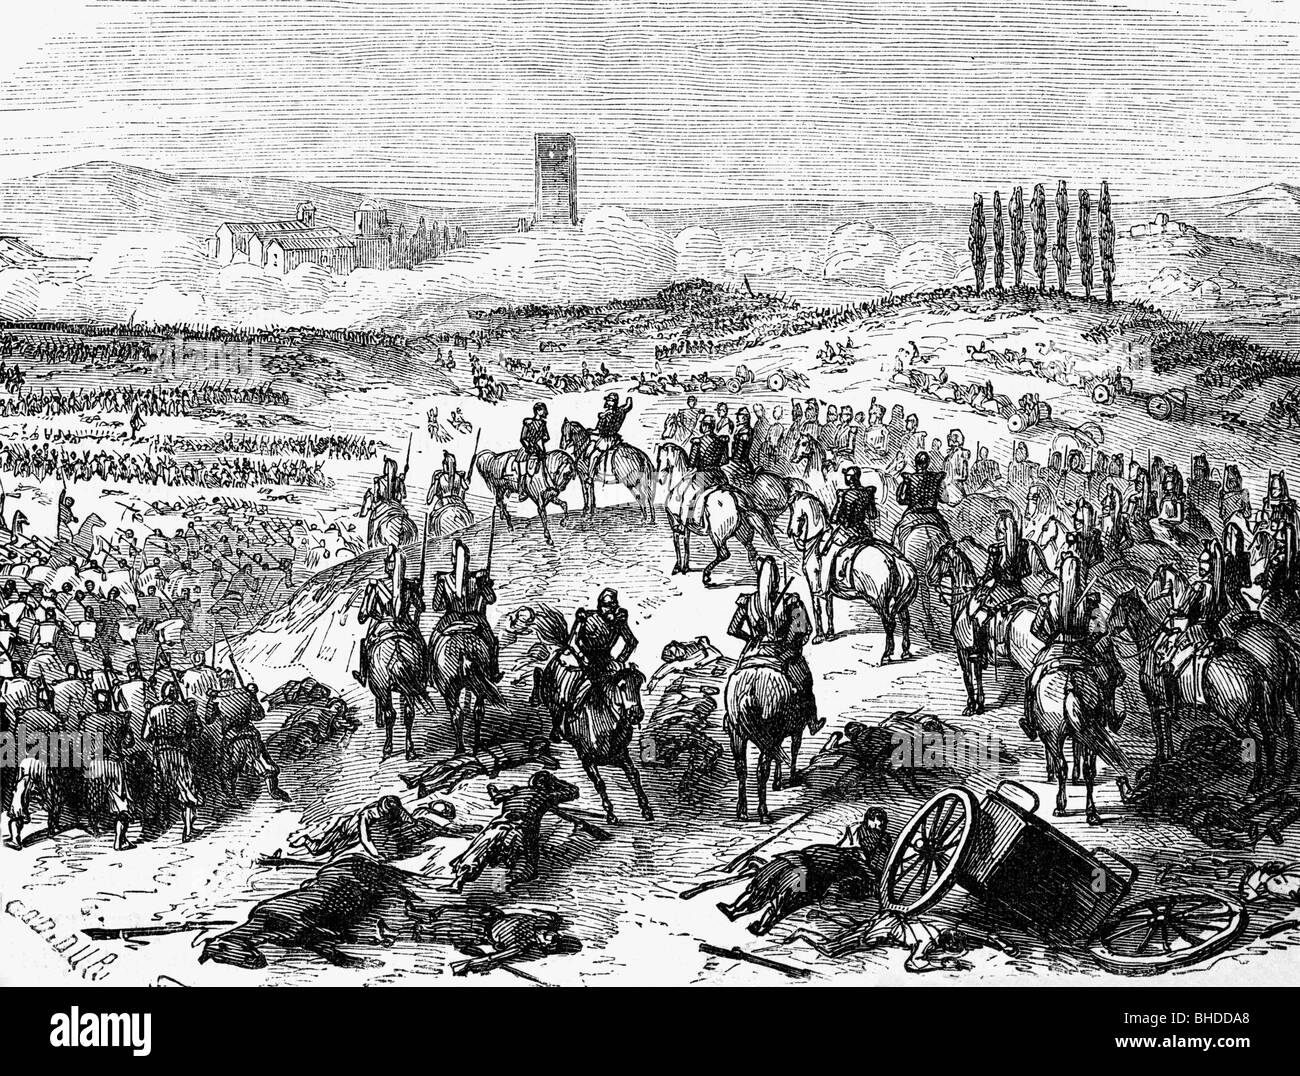 evsnts, Second Italian War of Independence 1859, Battle of Solferino, 24.6.1859, French Emperor Napoleon III and his staff, wood engraving, 19th century, Italy, Unification Wars, French, France, Lombardy, Risorgimento, historic, historical, people, Stock Photo